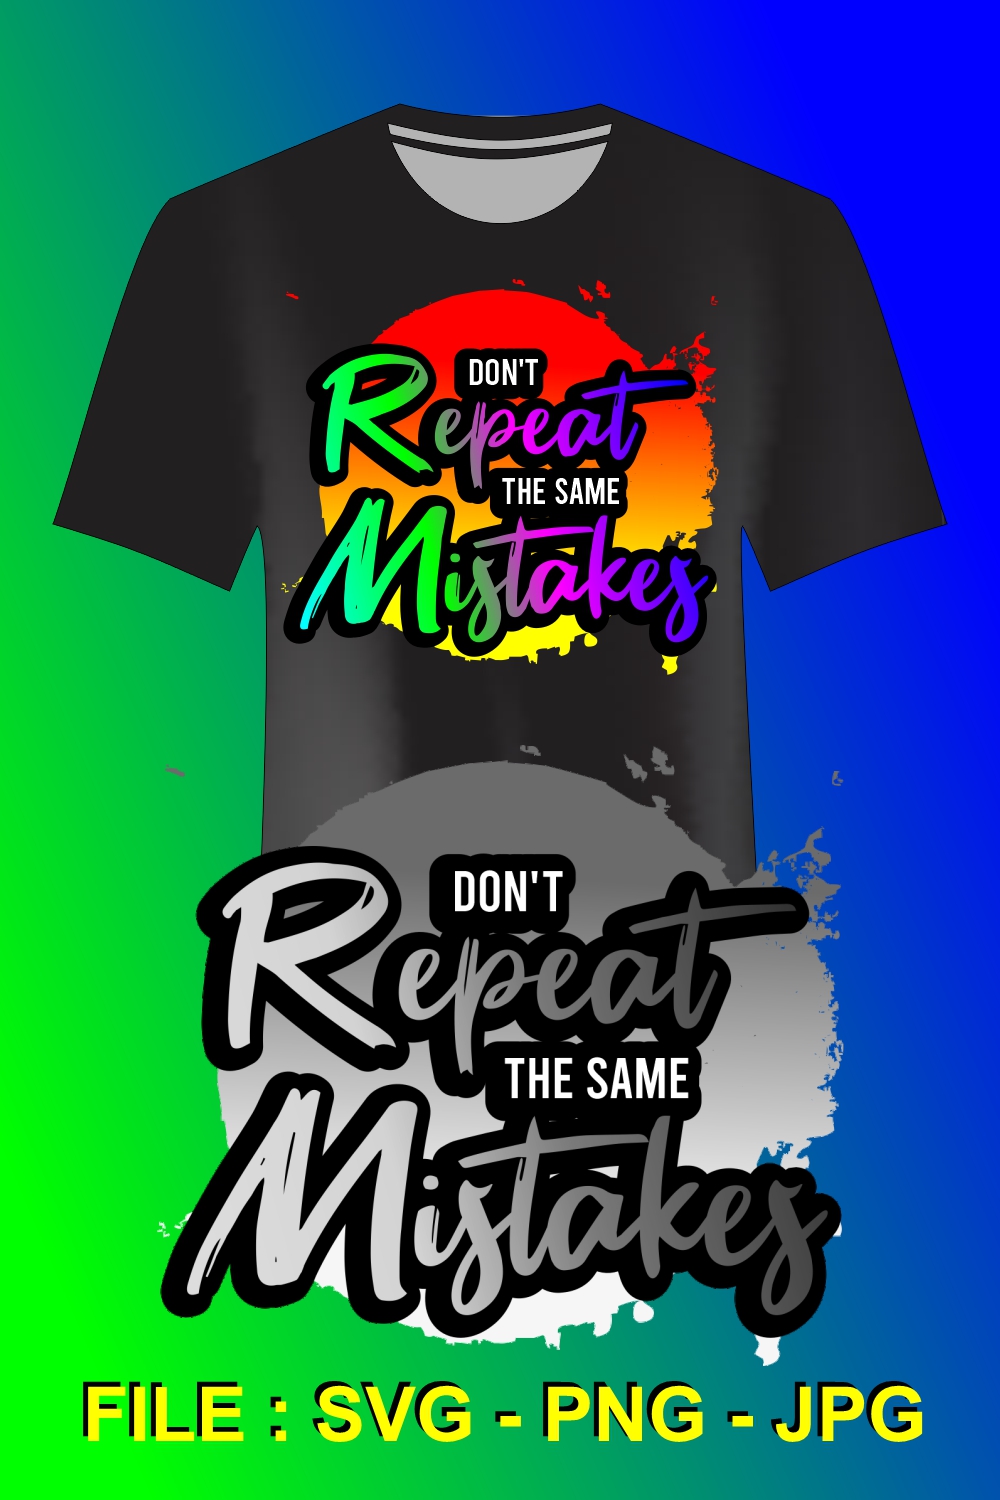 mb printerest Don't Repeat the Same Mistakes T-shirt Design.